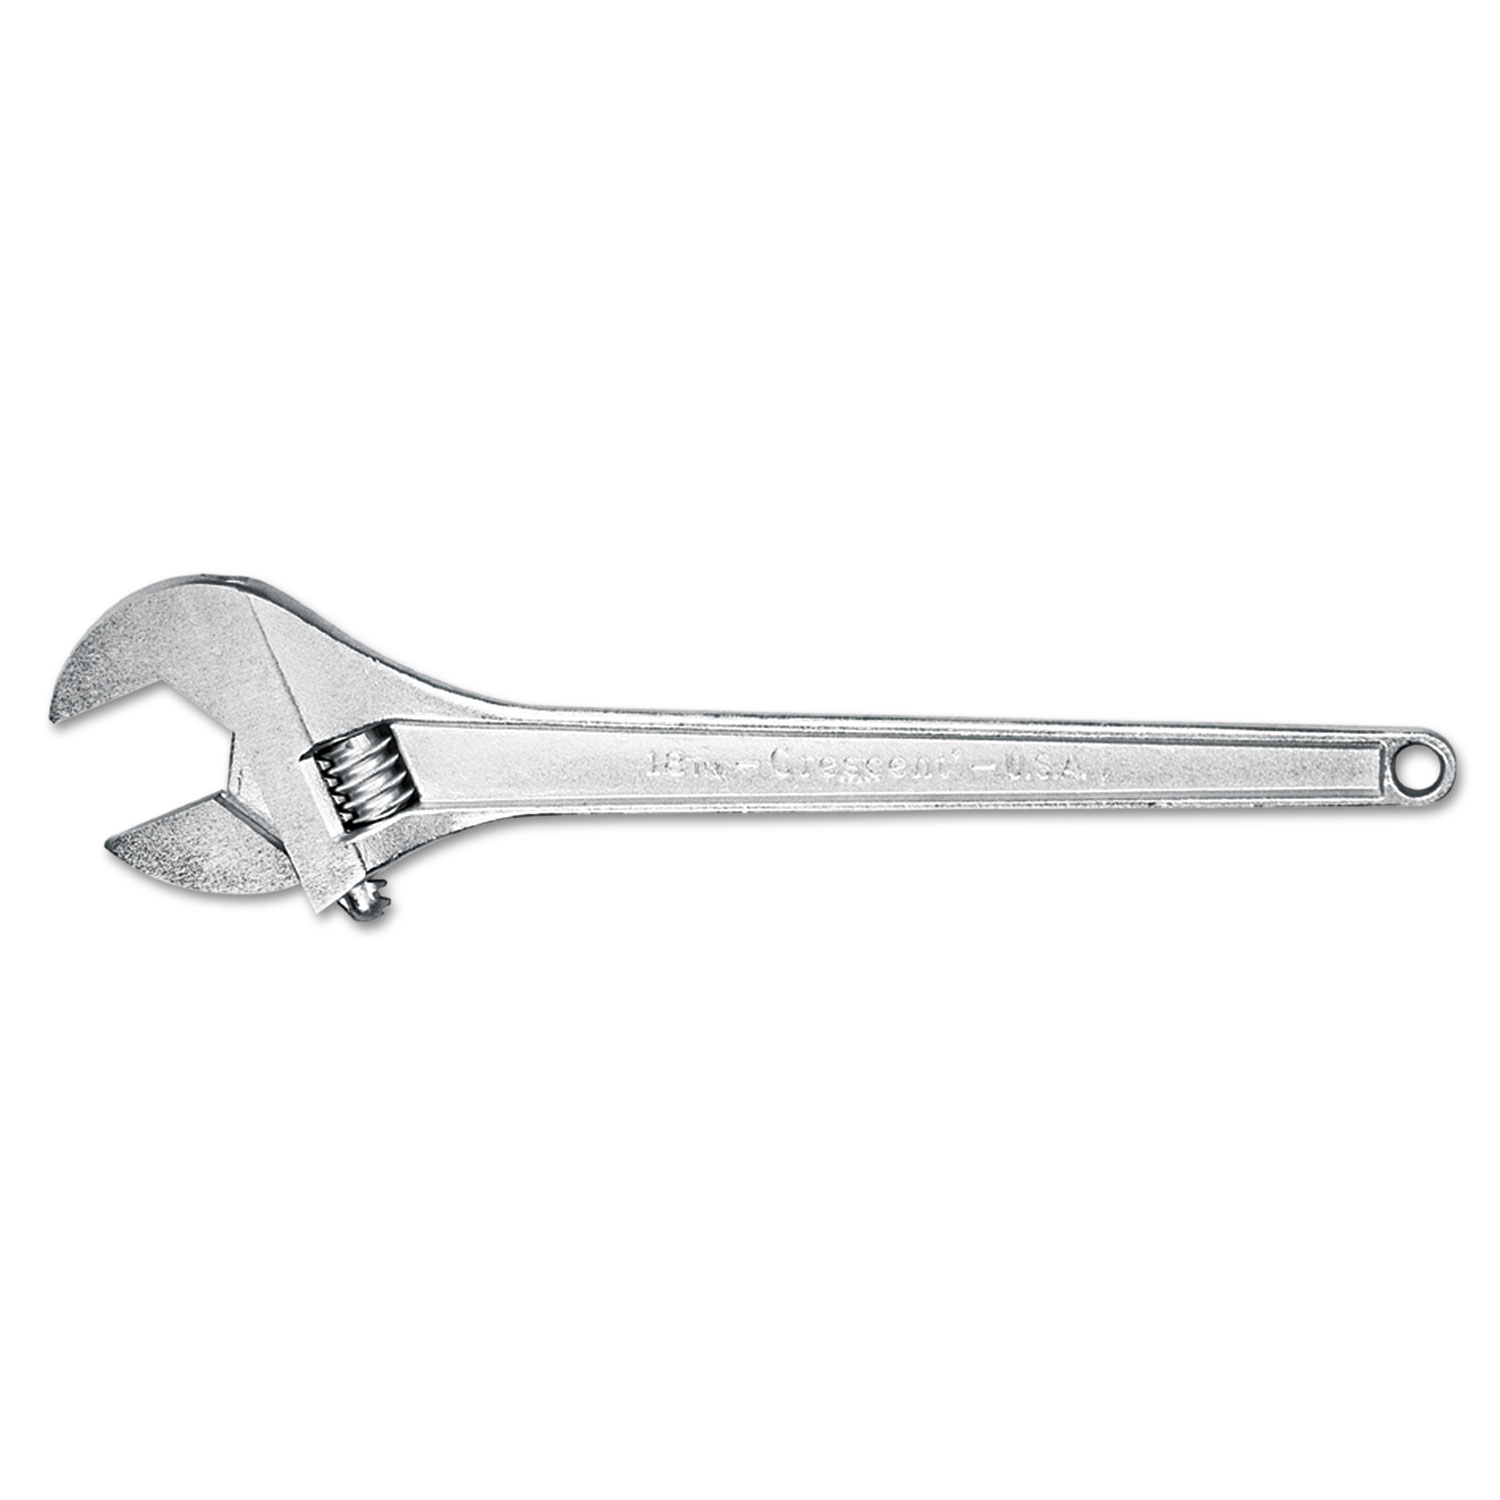 Crescent Adjustable Wrench, 15 Long, 1 11/16 Opening, Chrome